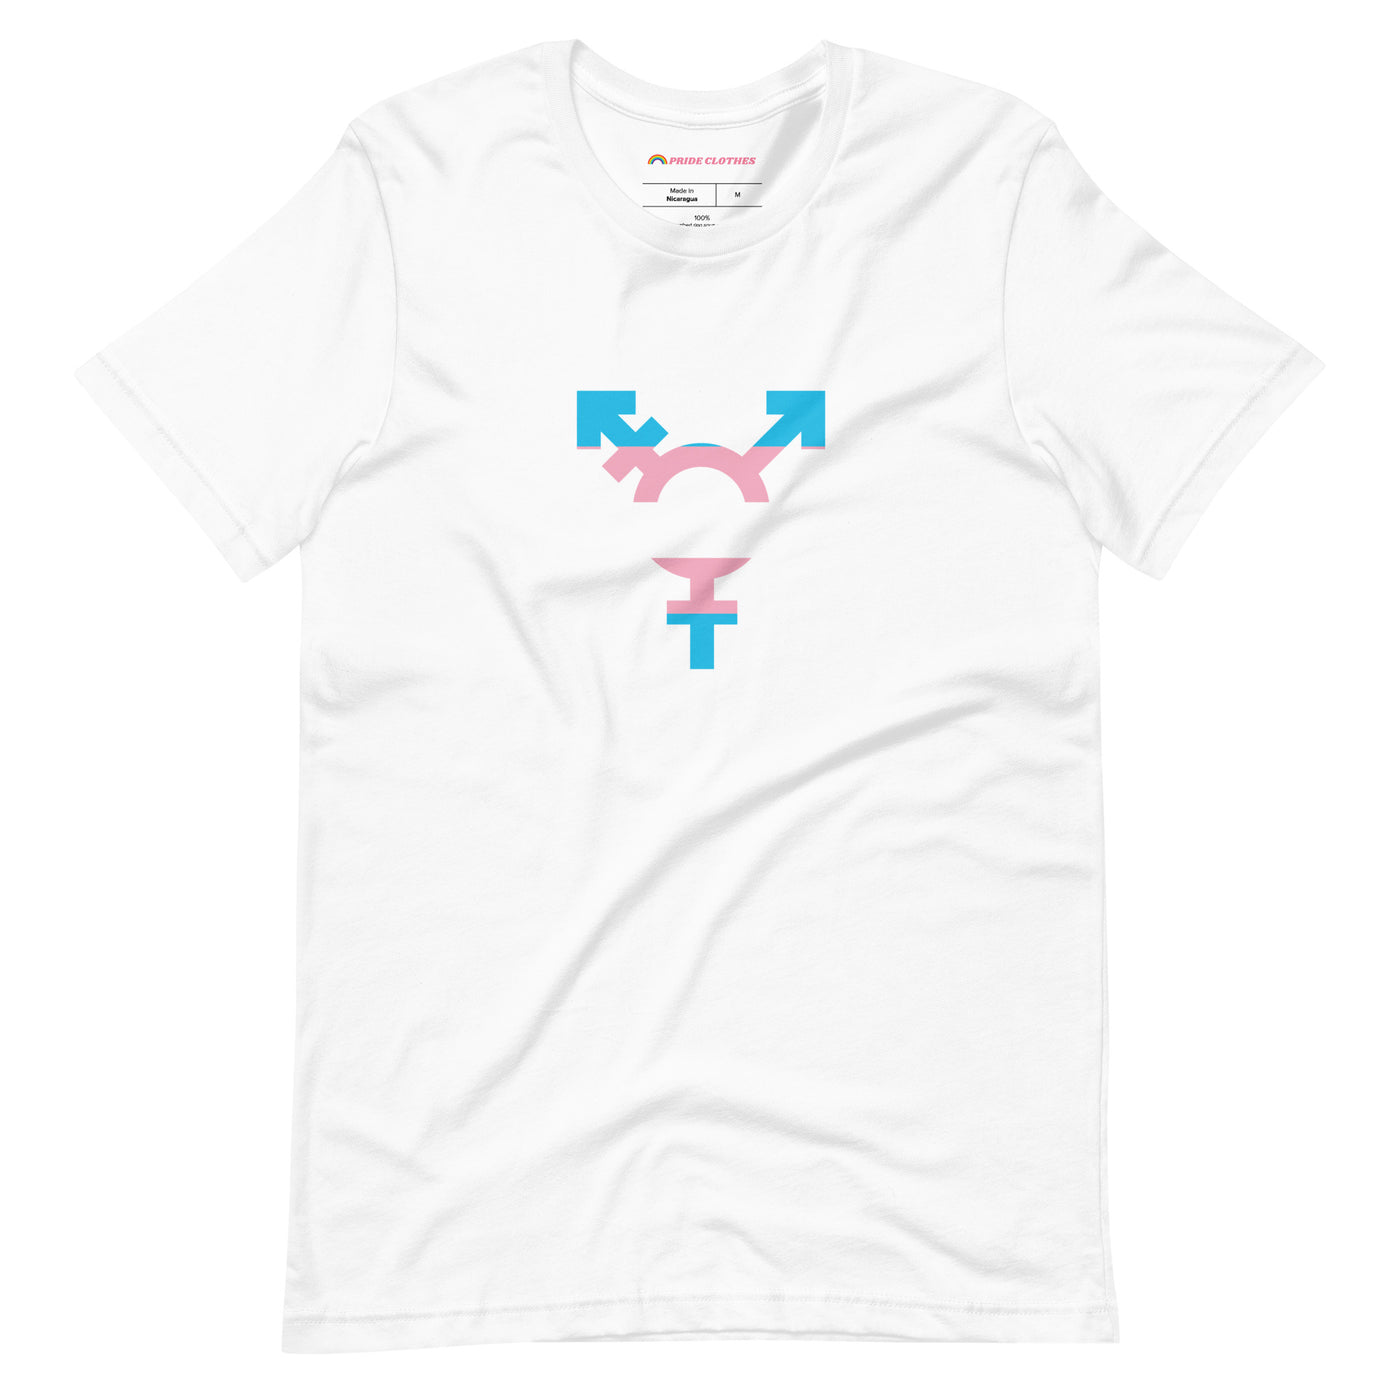 Pride Clothes - Authentic and Beautiful Trans Pride Flag Symbol T-Shirt - White